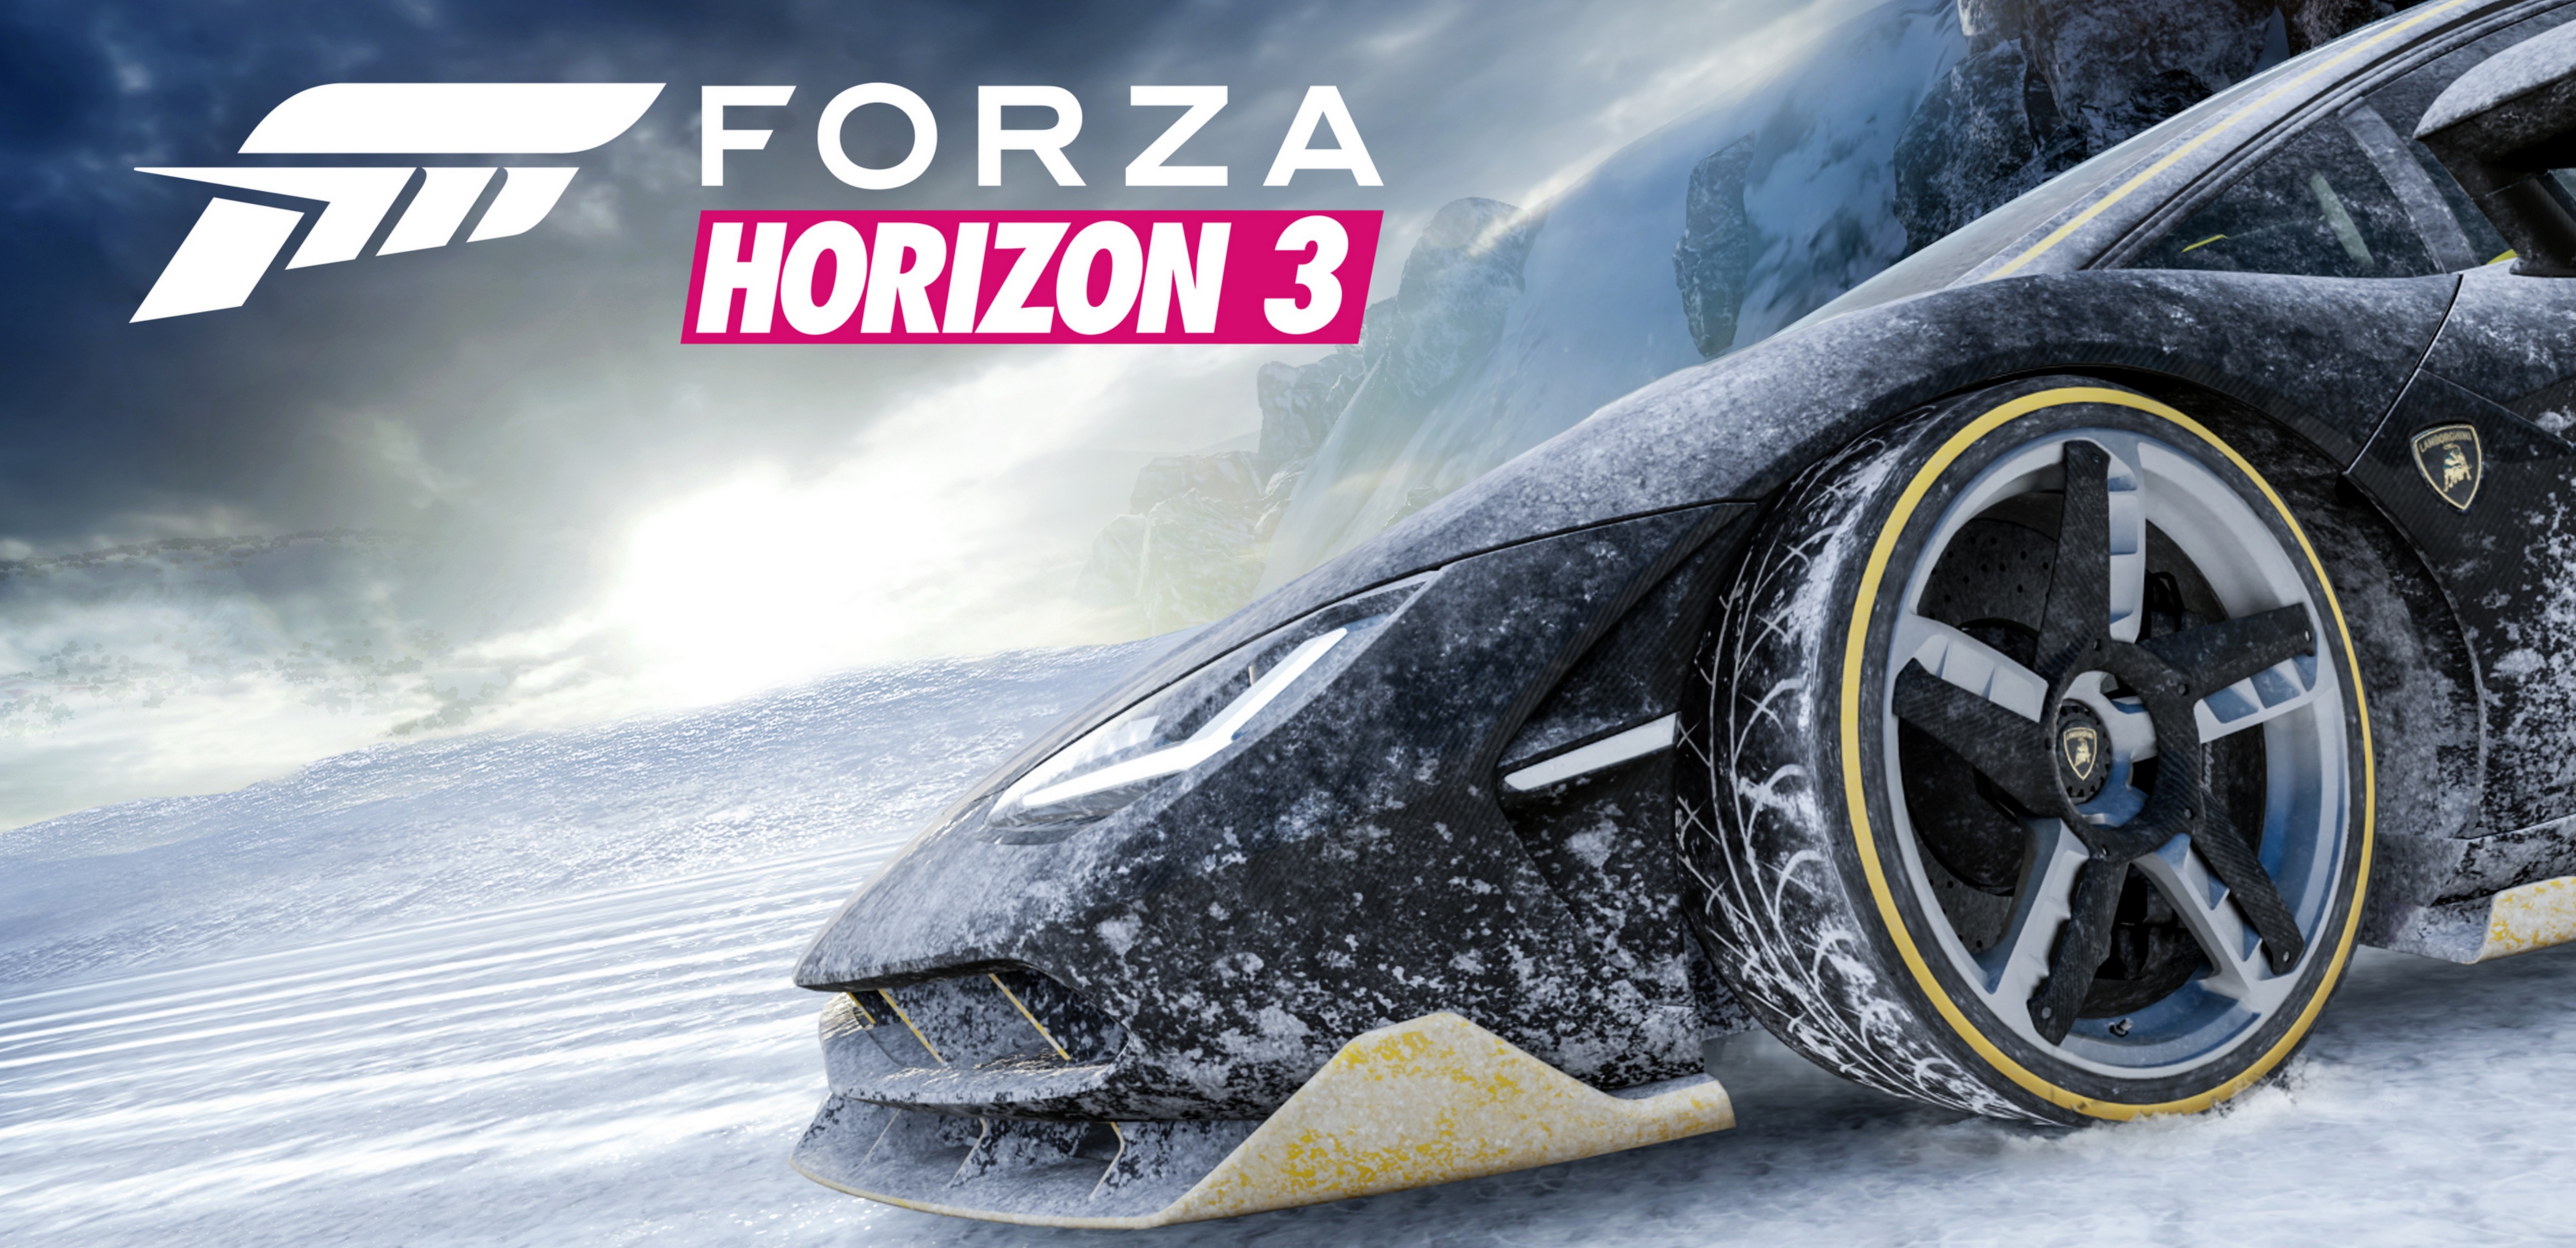 Alpinestars Car Pack and New Expansion Coming to Best-Selling Forza Horizon 3